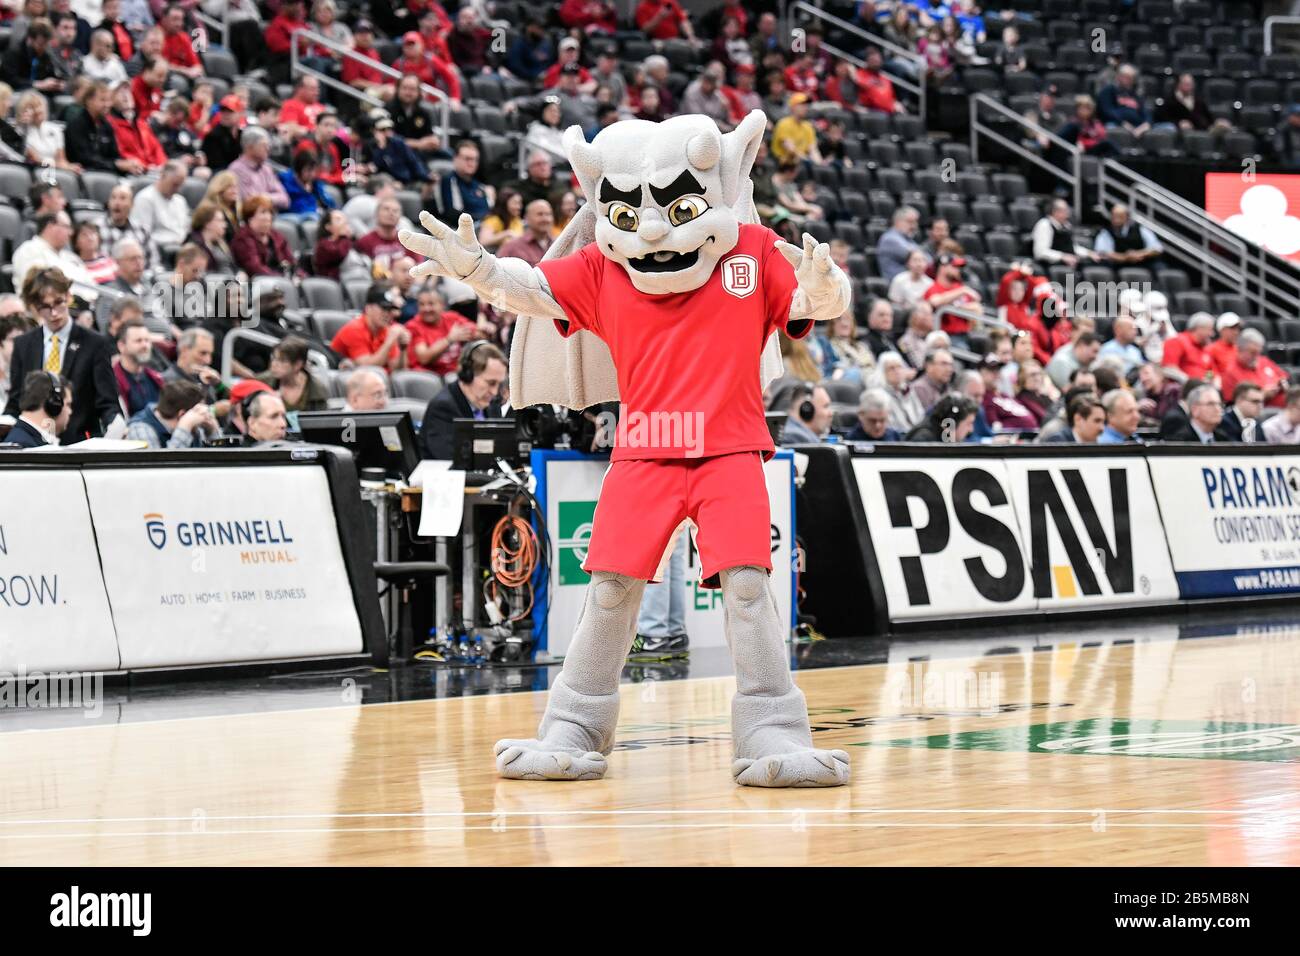 Mar 08, 2020: The Bradley mascot performs in the championship game of the  Missouri Valley Conference Men's Tournament between the Bradley Braves and  the Valparaiso Crusaders. Held at The Enterprise Center in